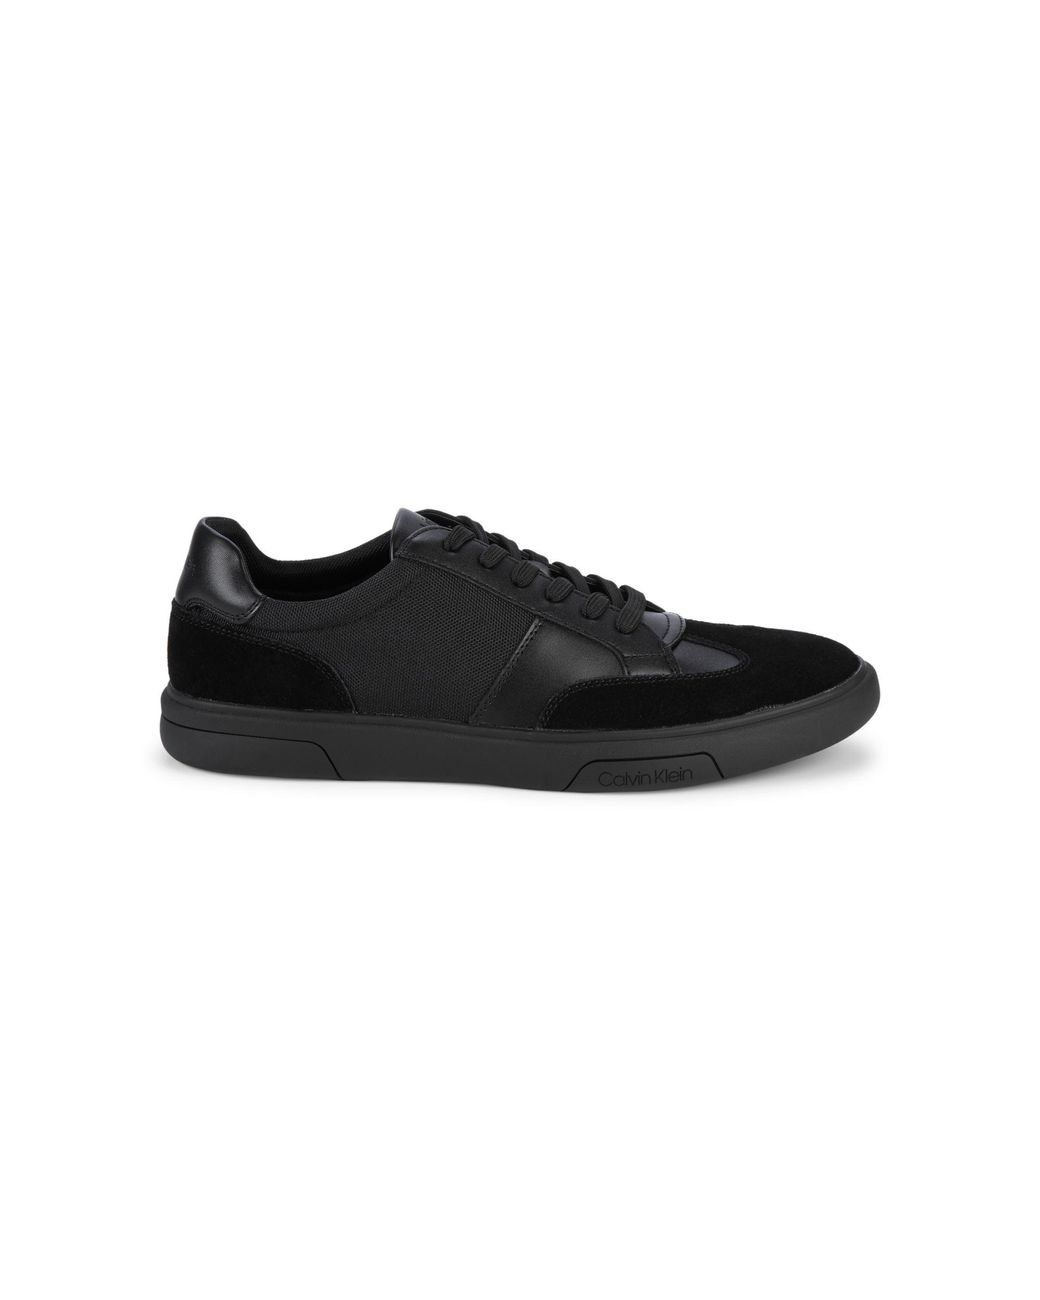 Calvin Klein Suede Gaius Lace-up Sneakers in Black for Men | Lyst